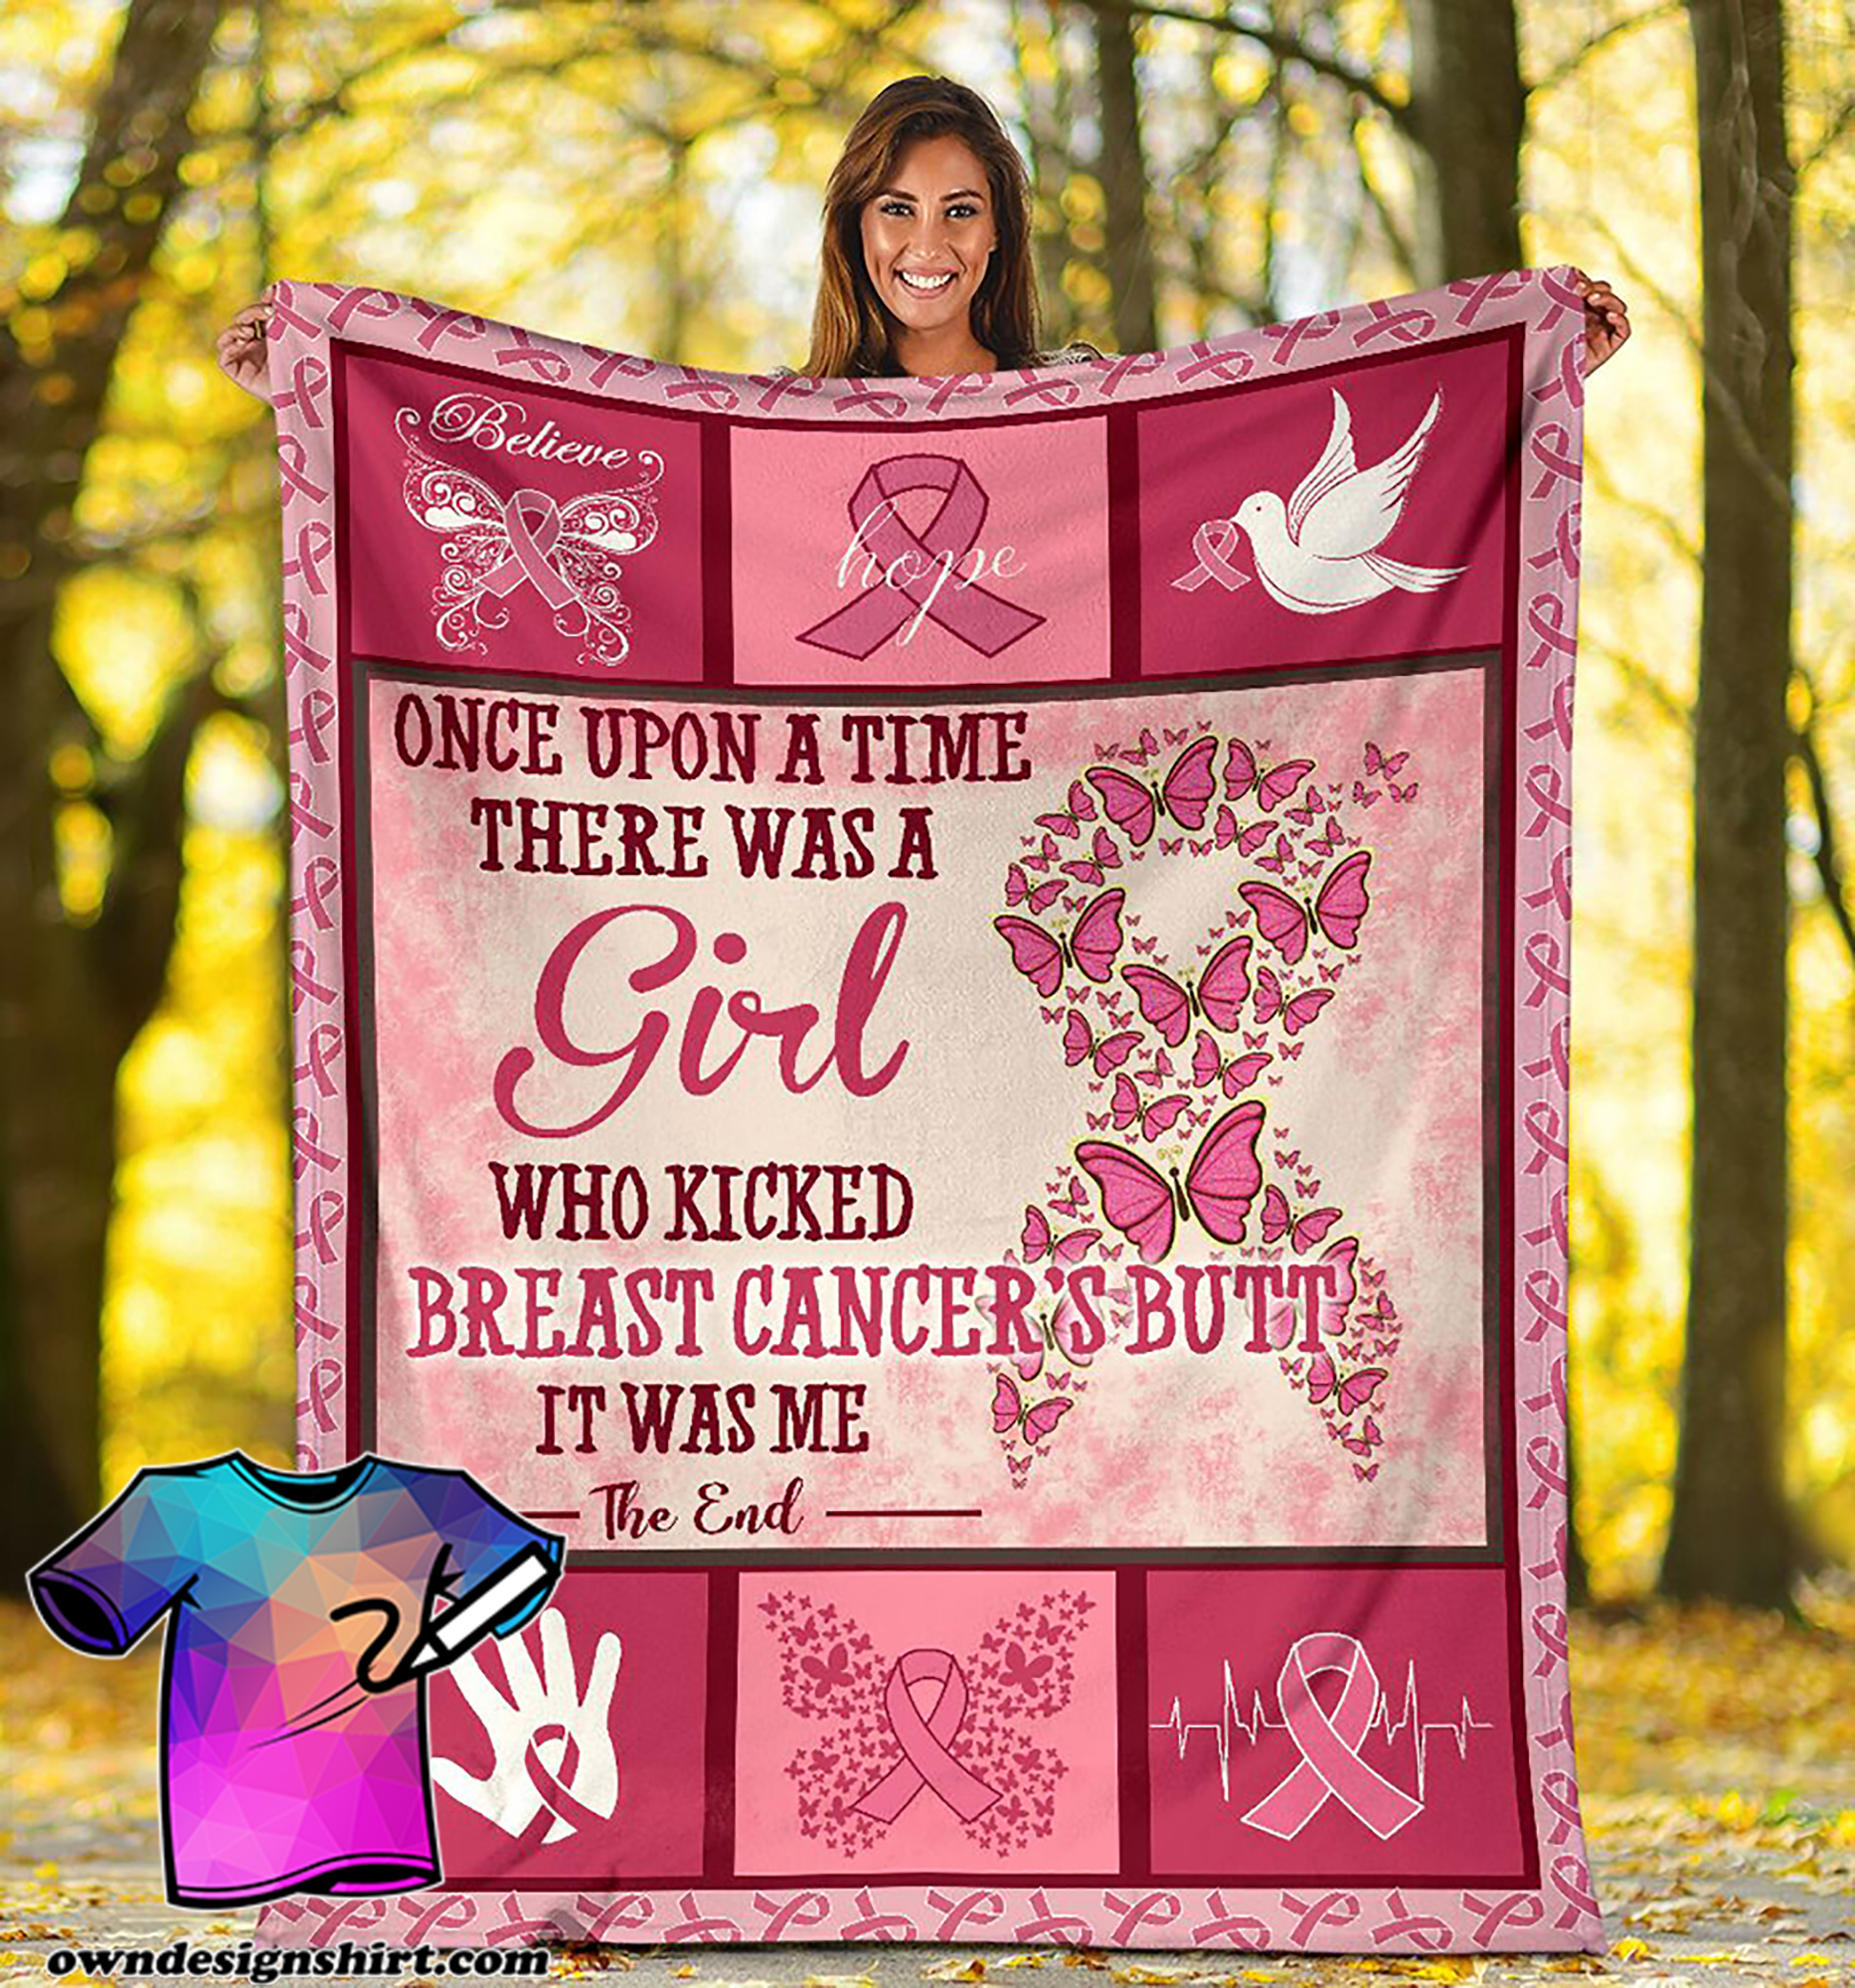 Once upon a time there was a girl who kicked breast cancer all over print blanket